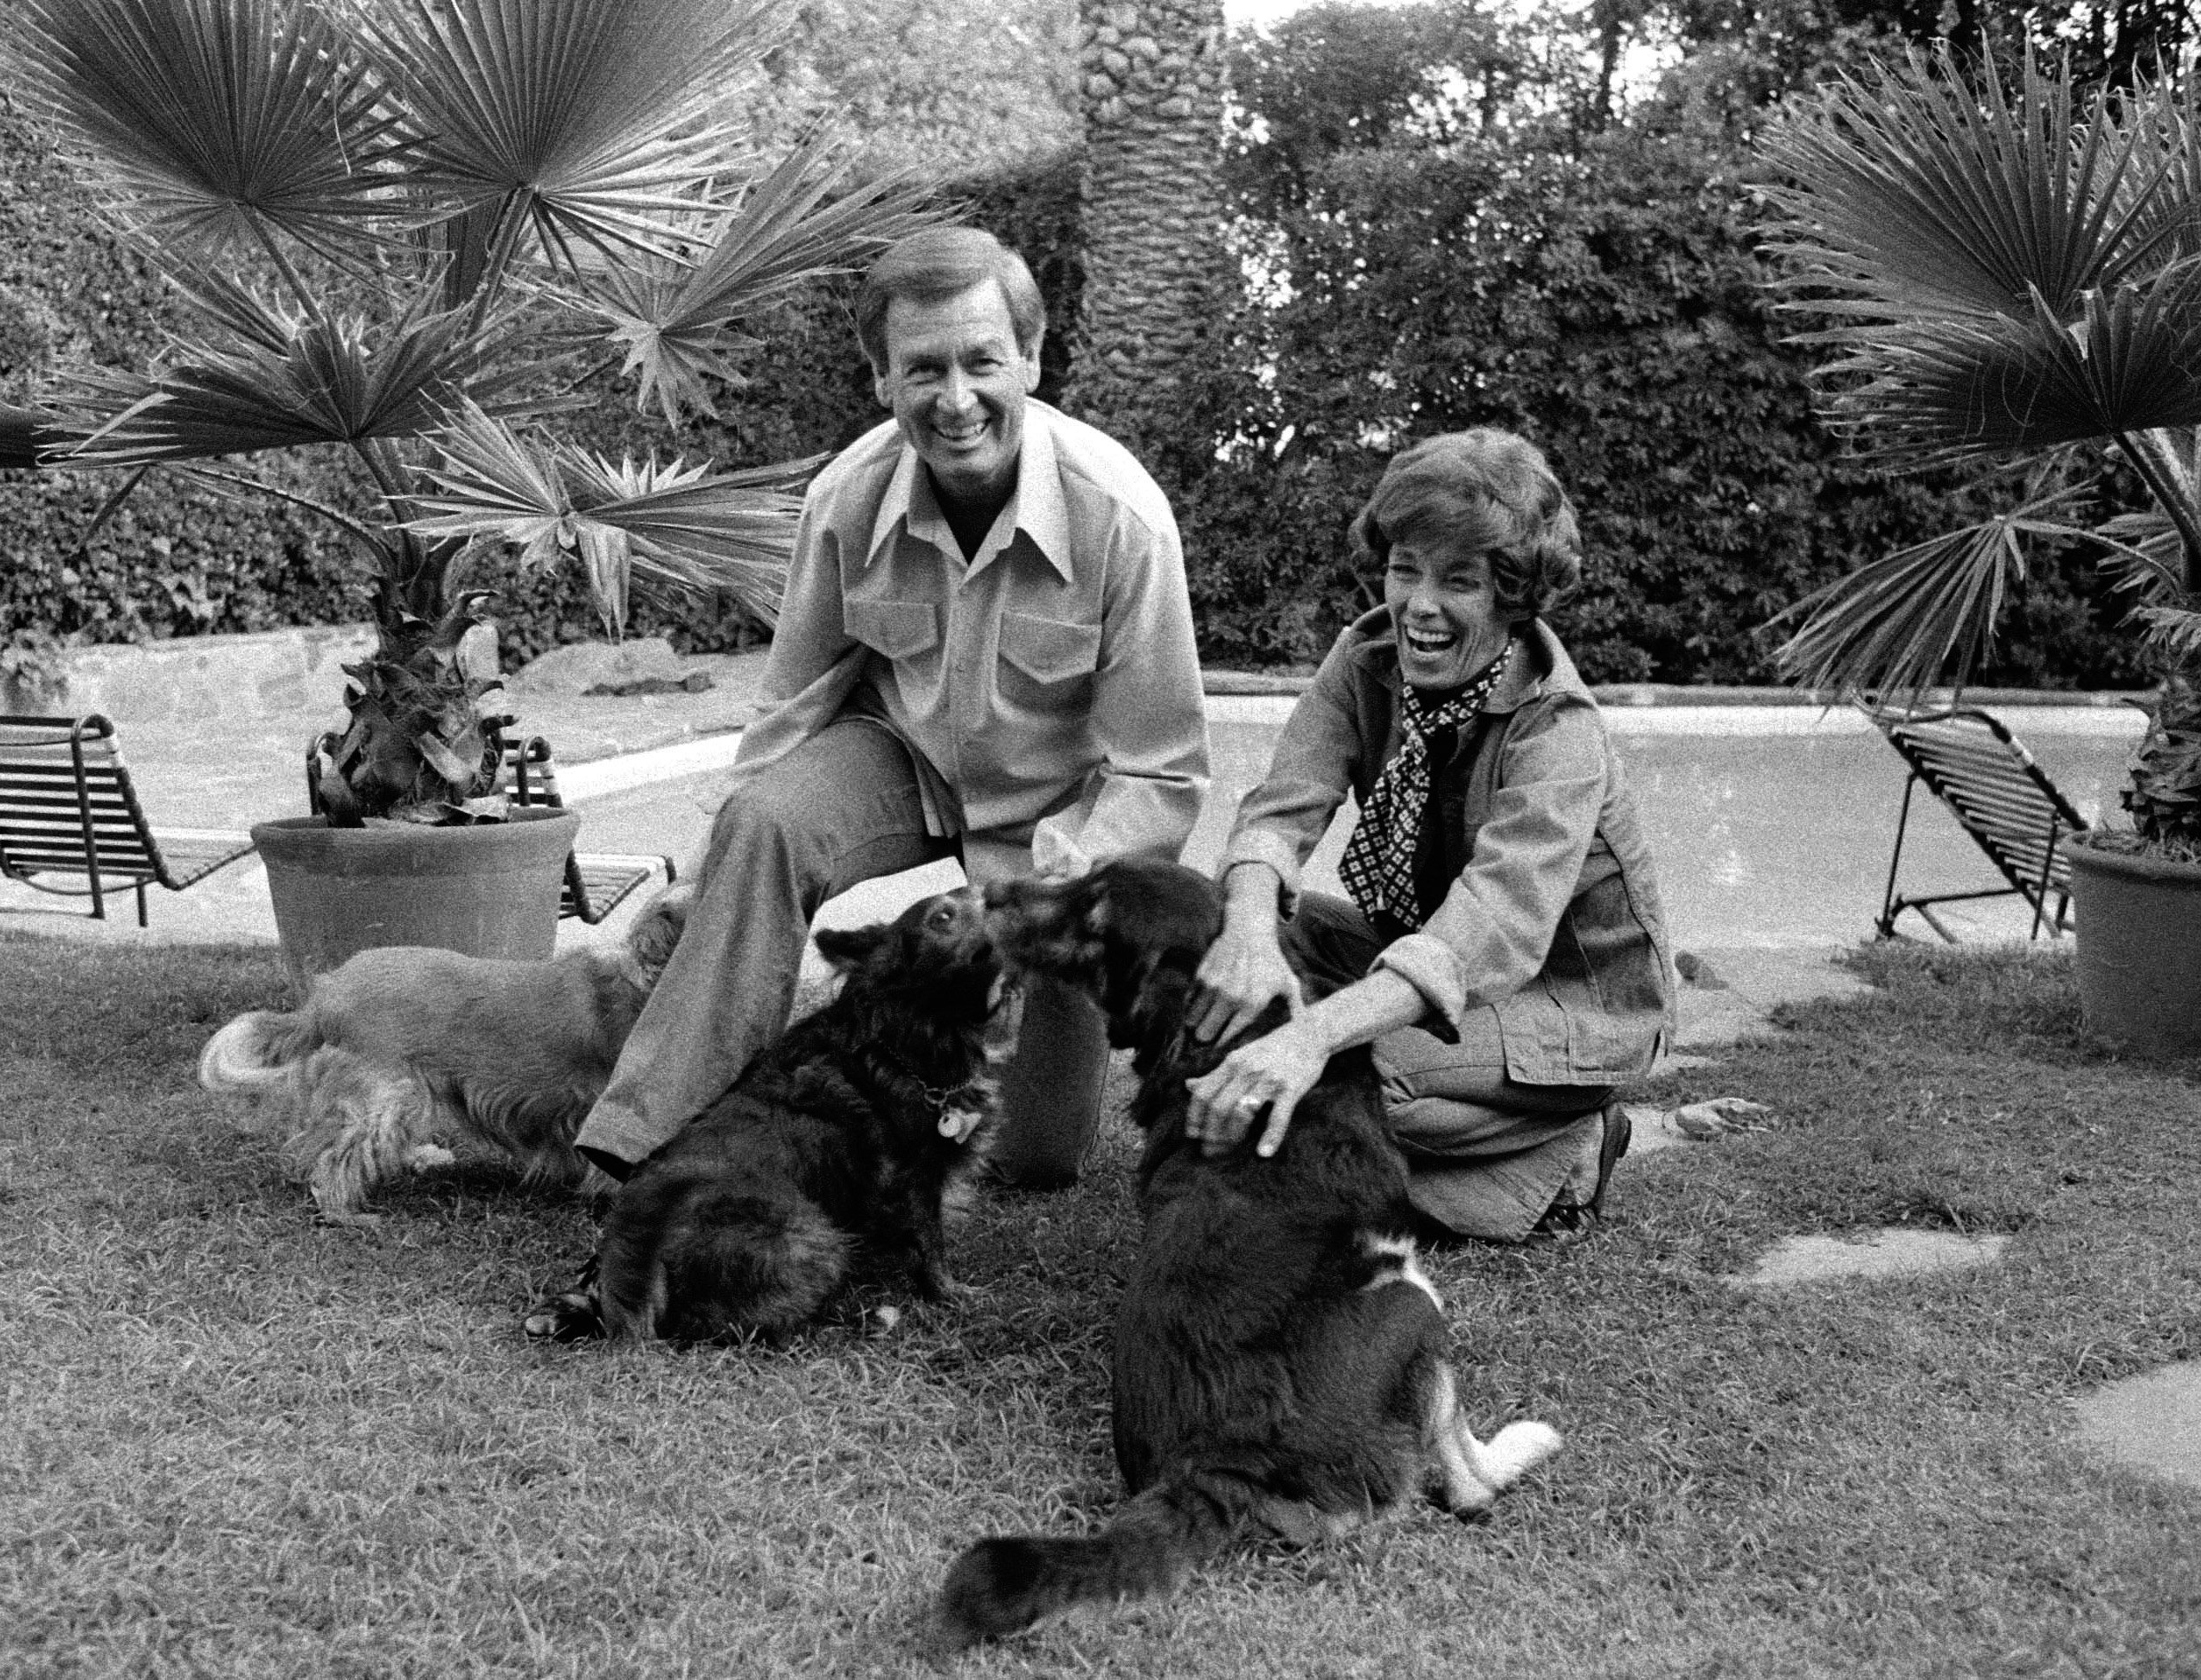 Bob Barker and his wife Dorothy Jo Gideon in their back yard, November 4, 1977 | Source: Getty Images